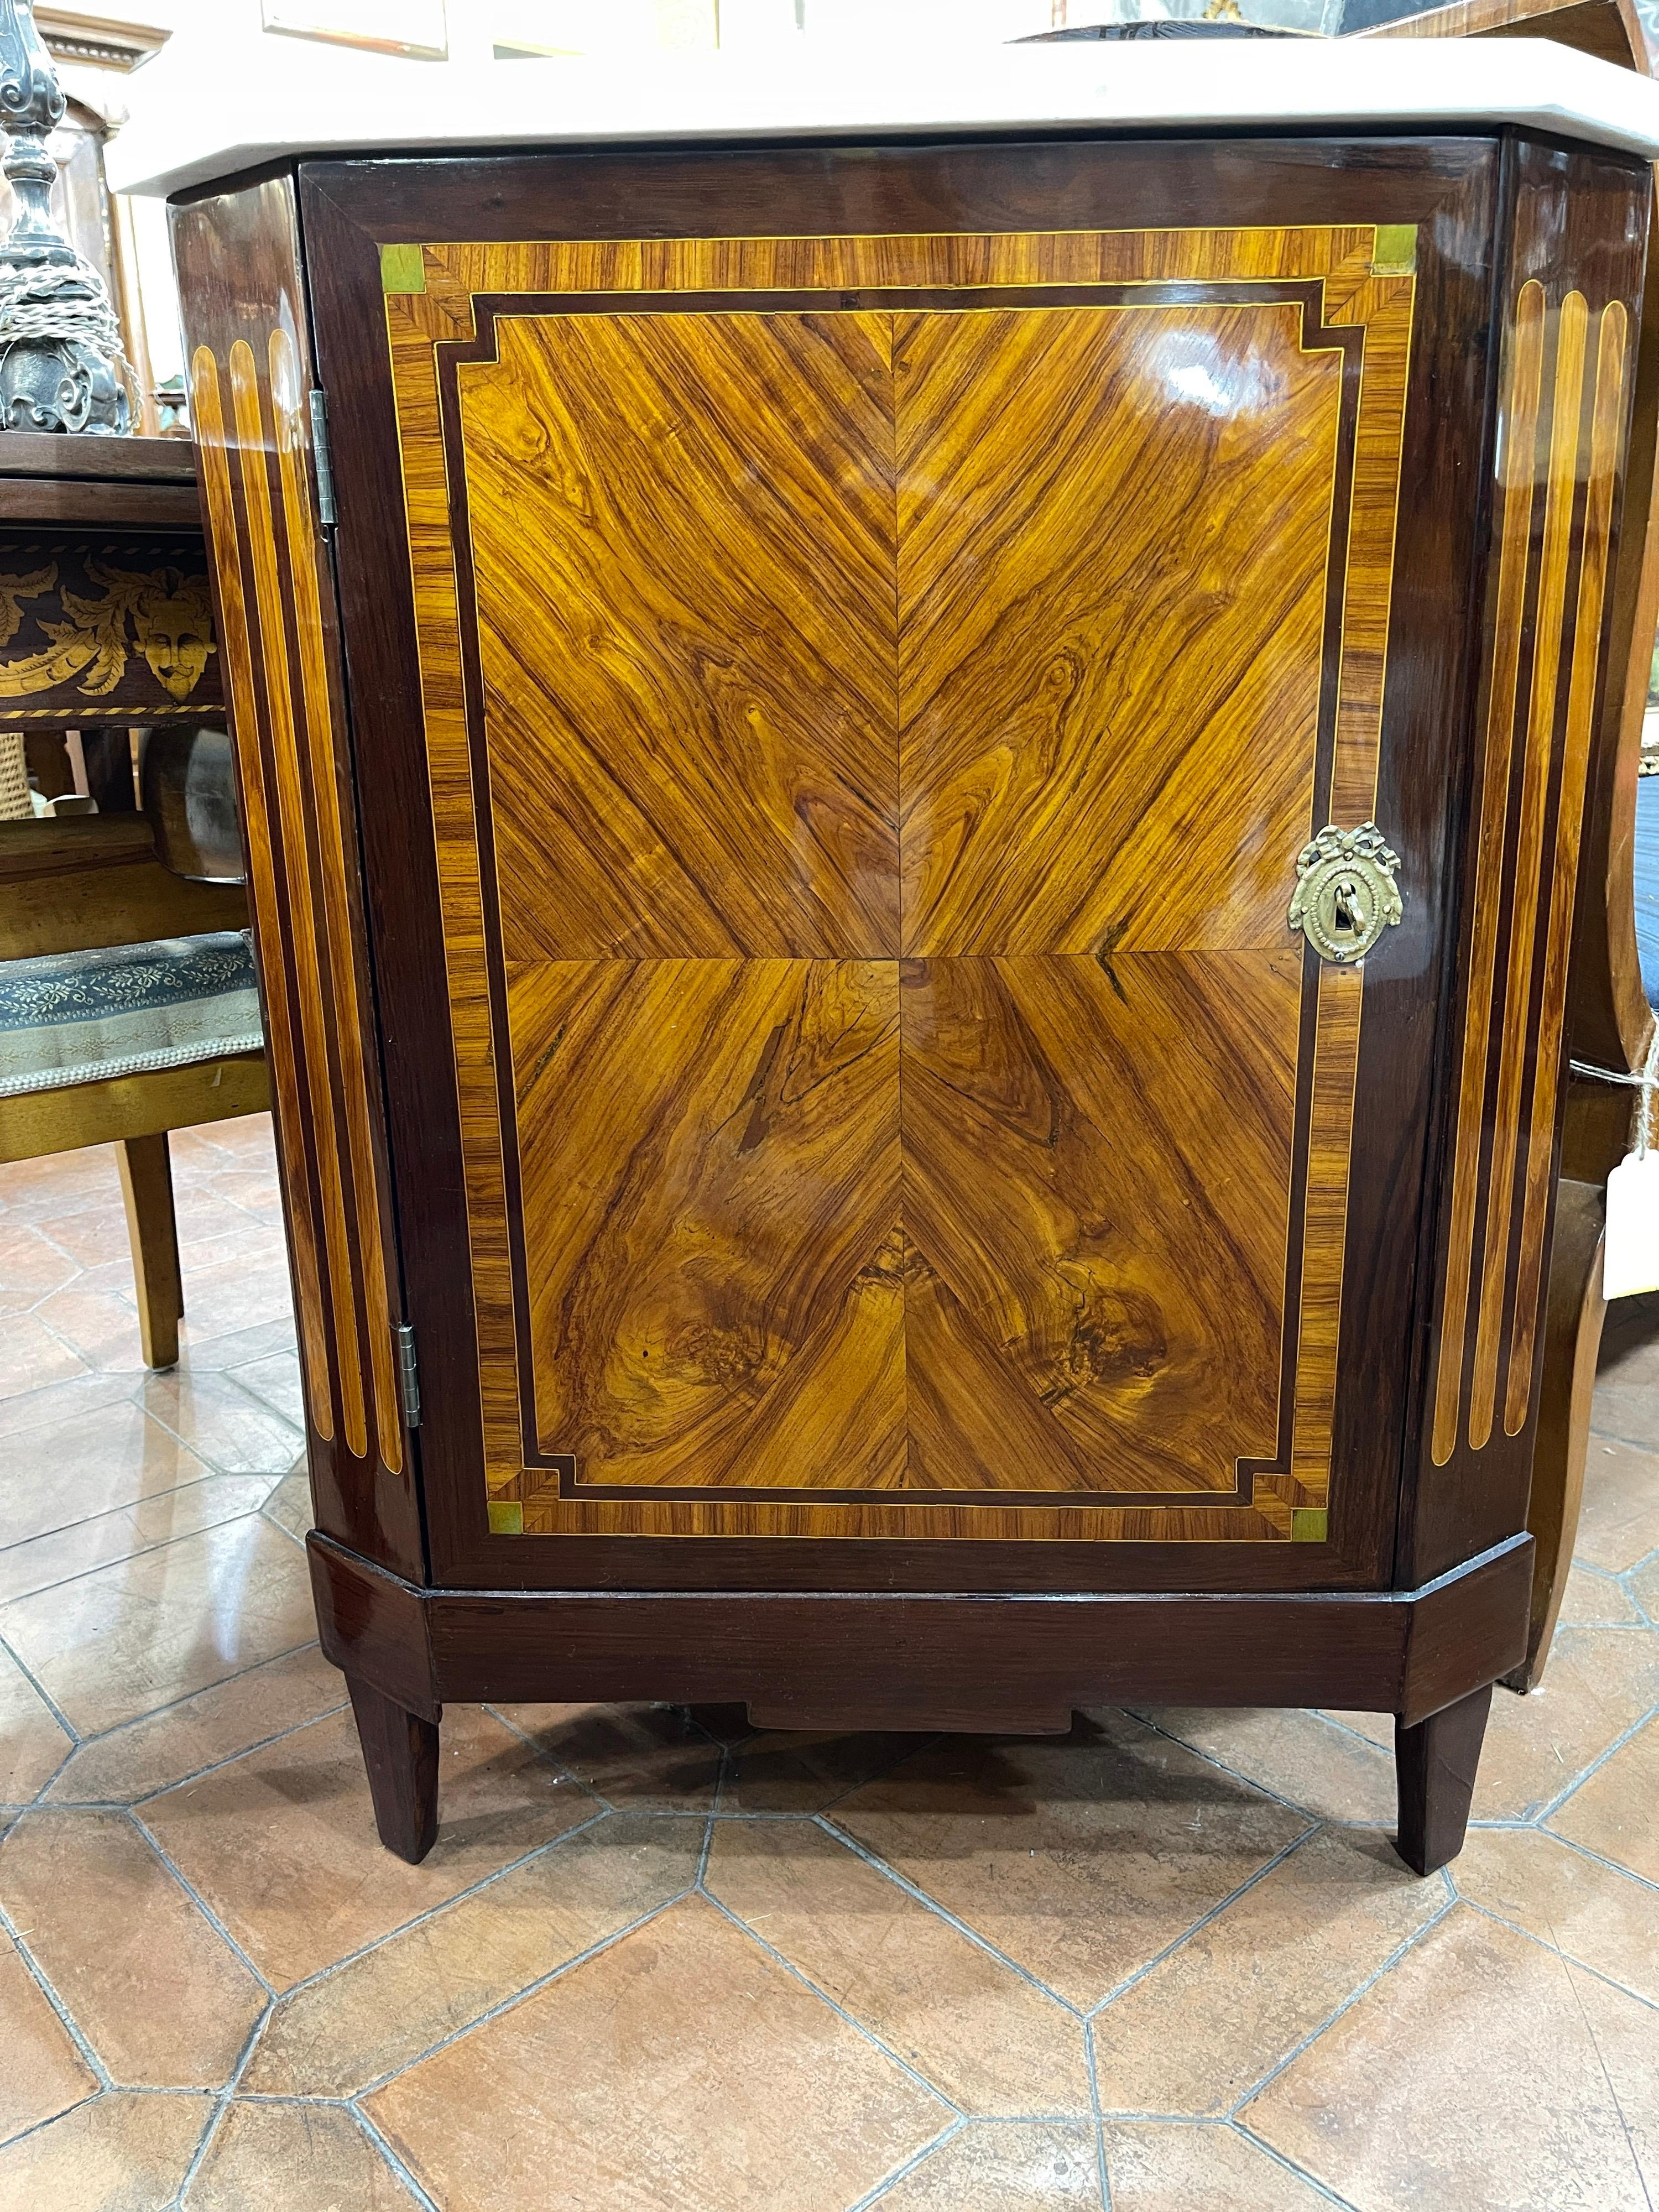 French corner cabinet, Louis XVI era, circa 1790, in Kingwood and Rosewood, inlaid with fruit woods. White Carrara marble on the top, not contemporary, certainly replaced in the late 19th century early twentieth century. Furniture of beautiful size